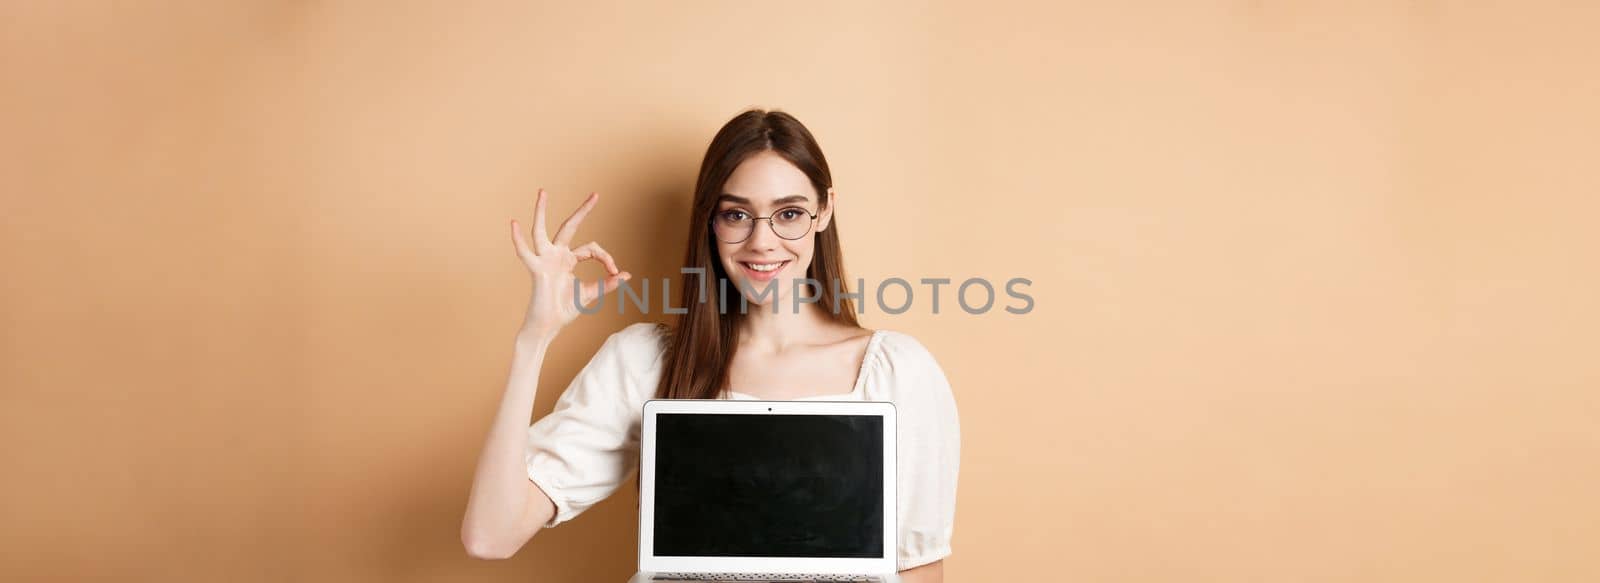 E-commerce. Smiling young woman in glasses showing okay sign and laptop screen, recommending internet promo, standing on beige background.